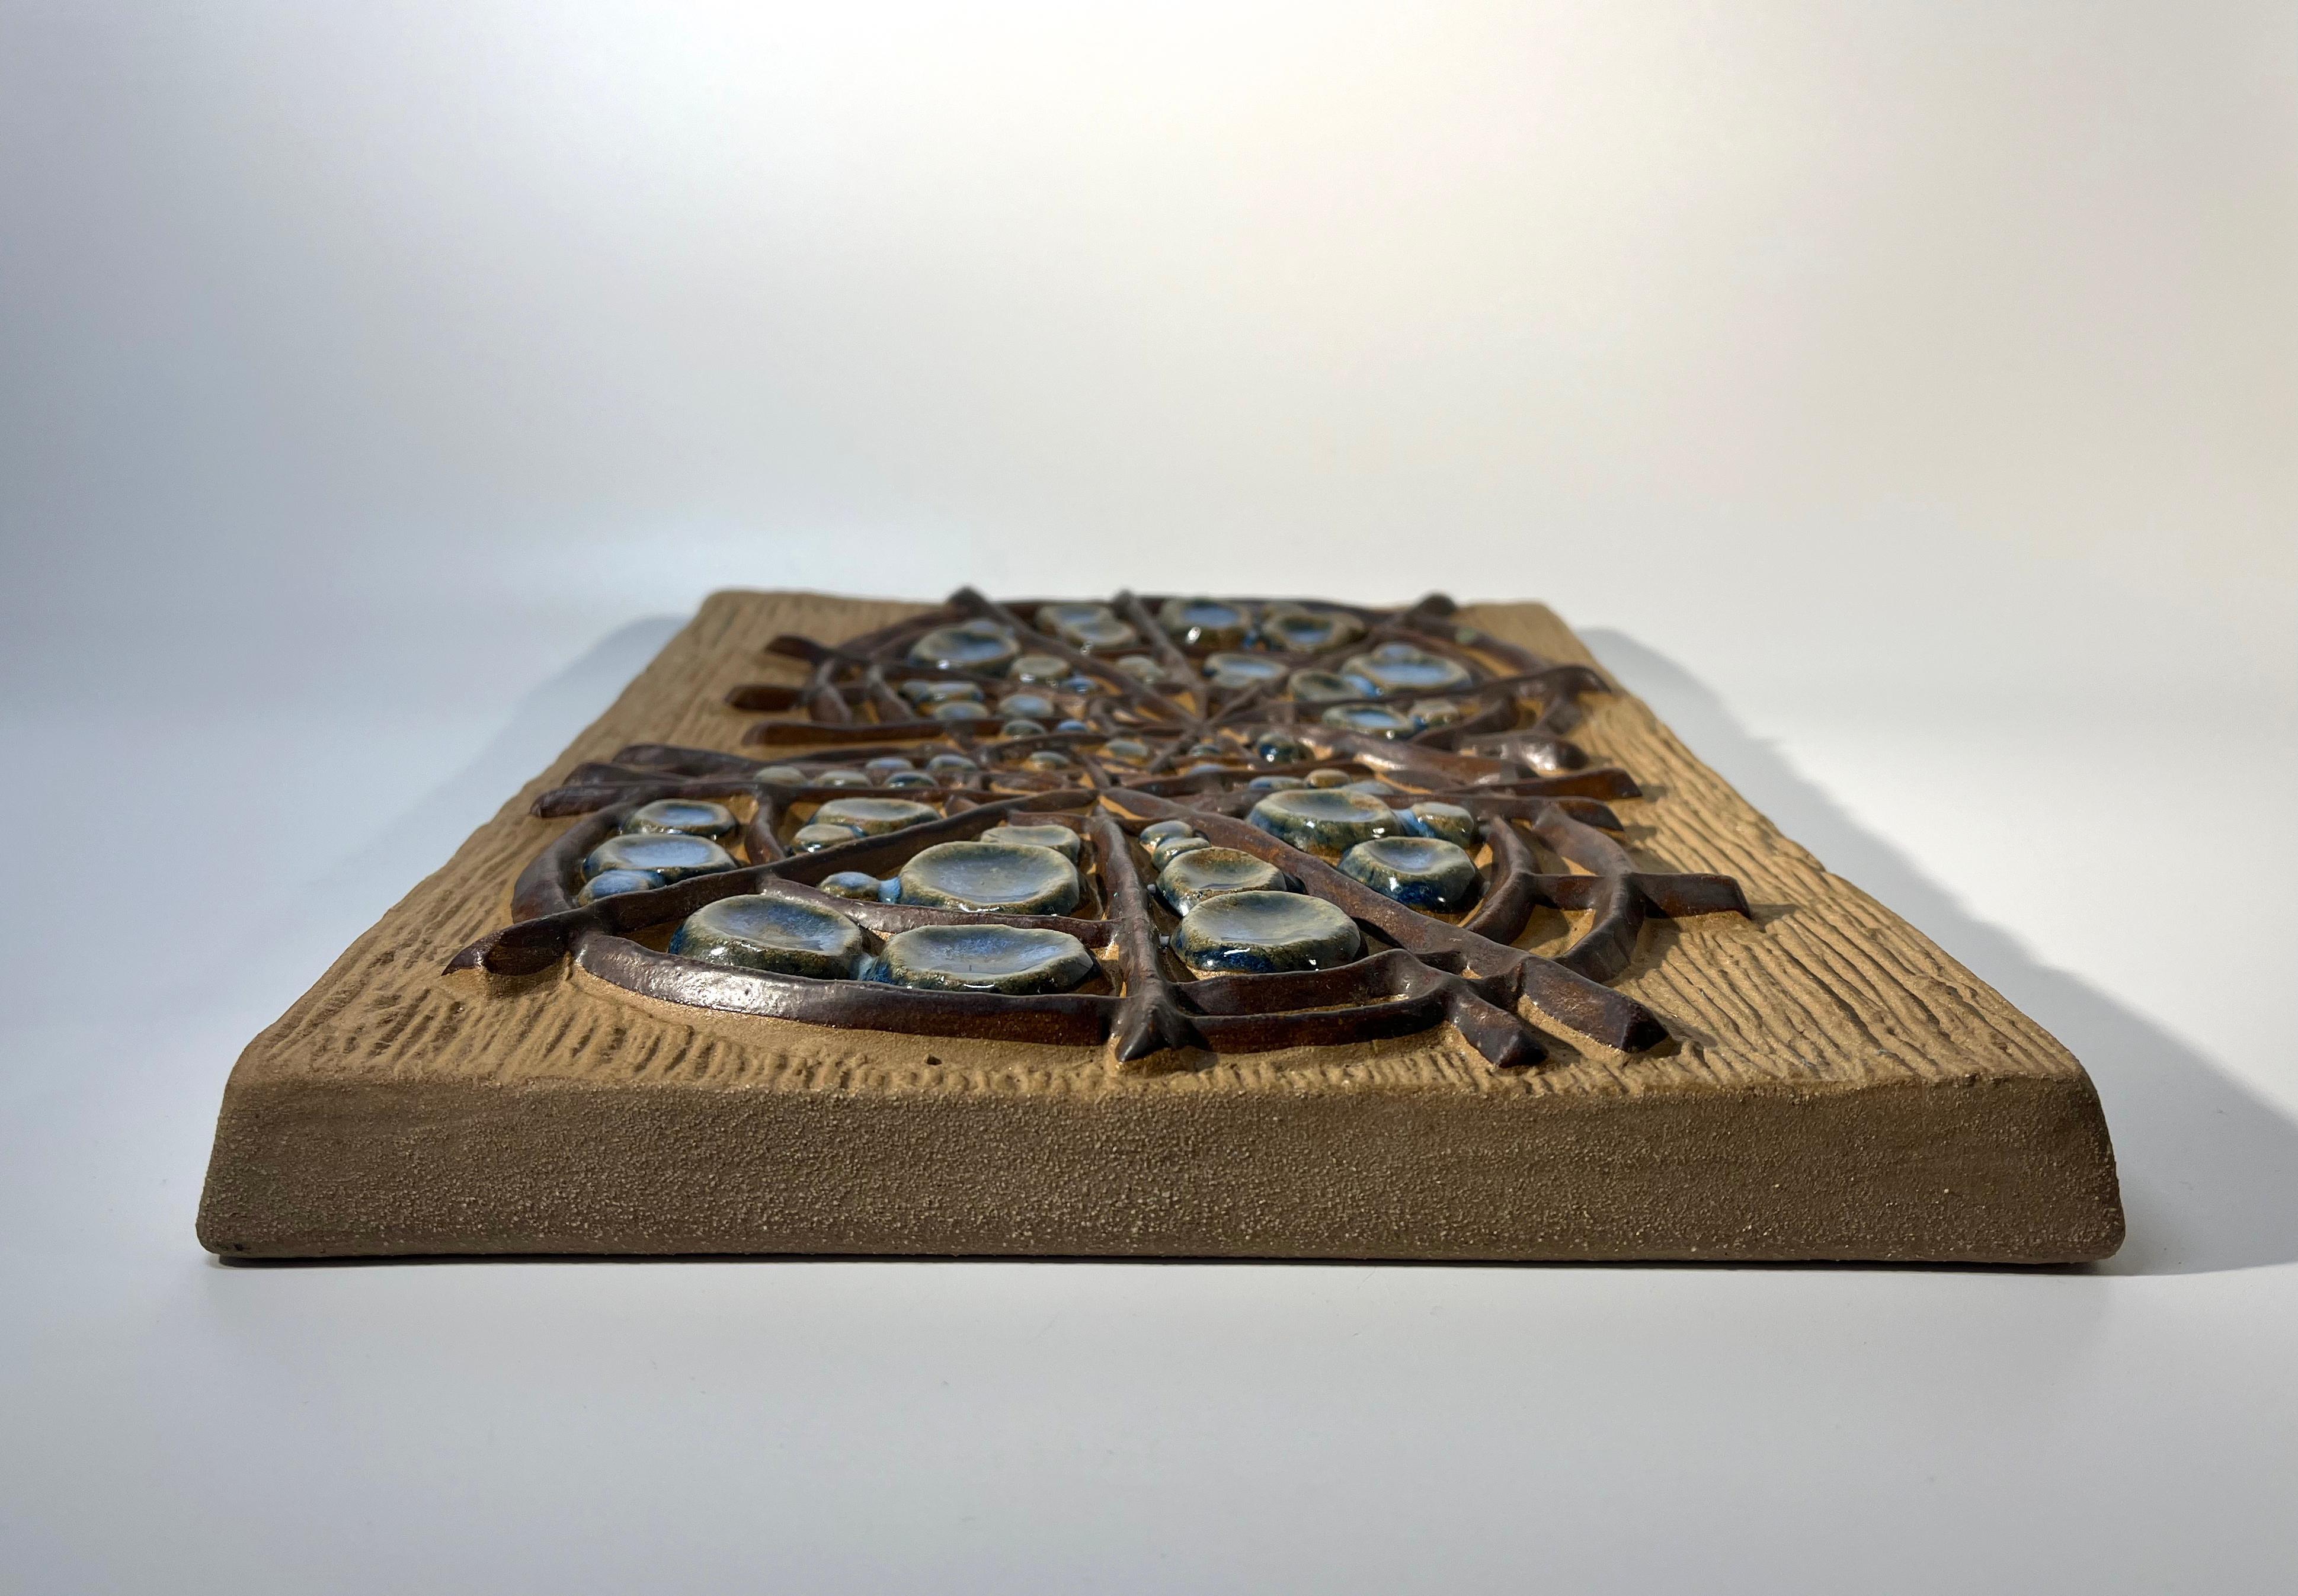 Ceramic Abstract Wheels By Marianne Starck For Michael Andersen. Danish Wall Plaque For Sale